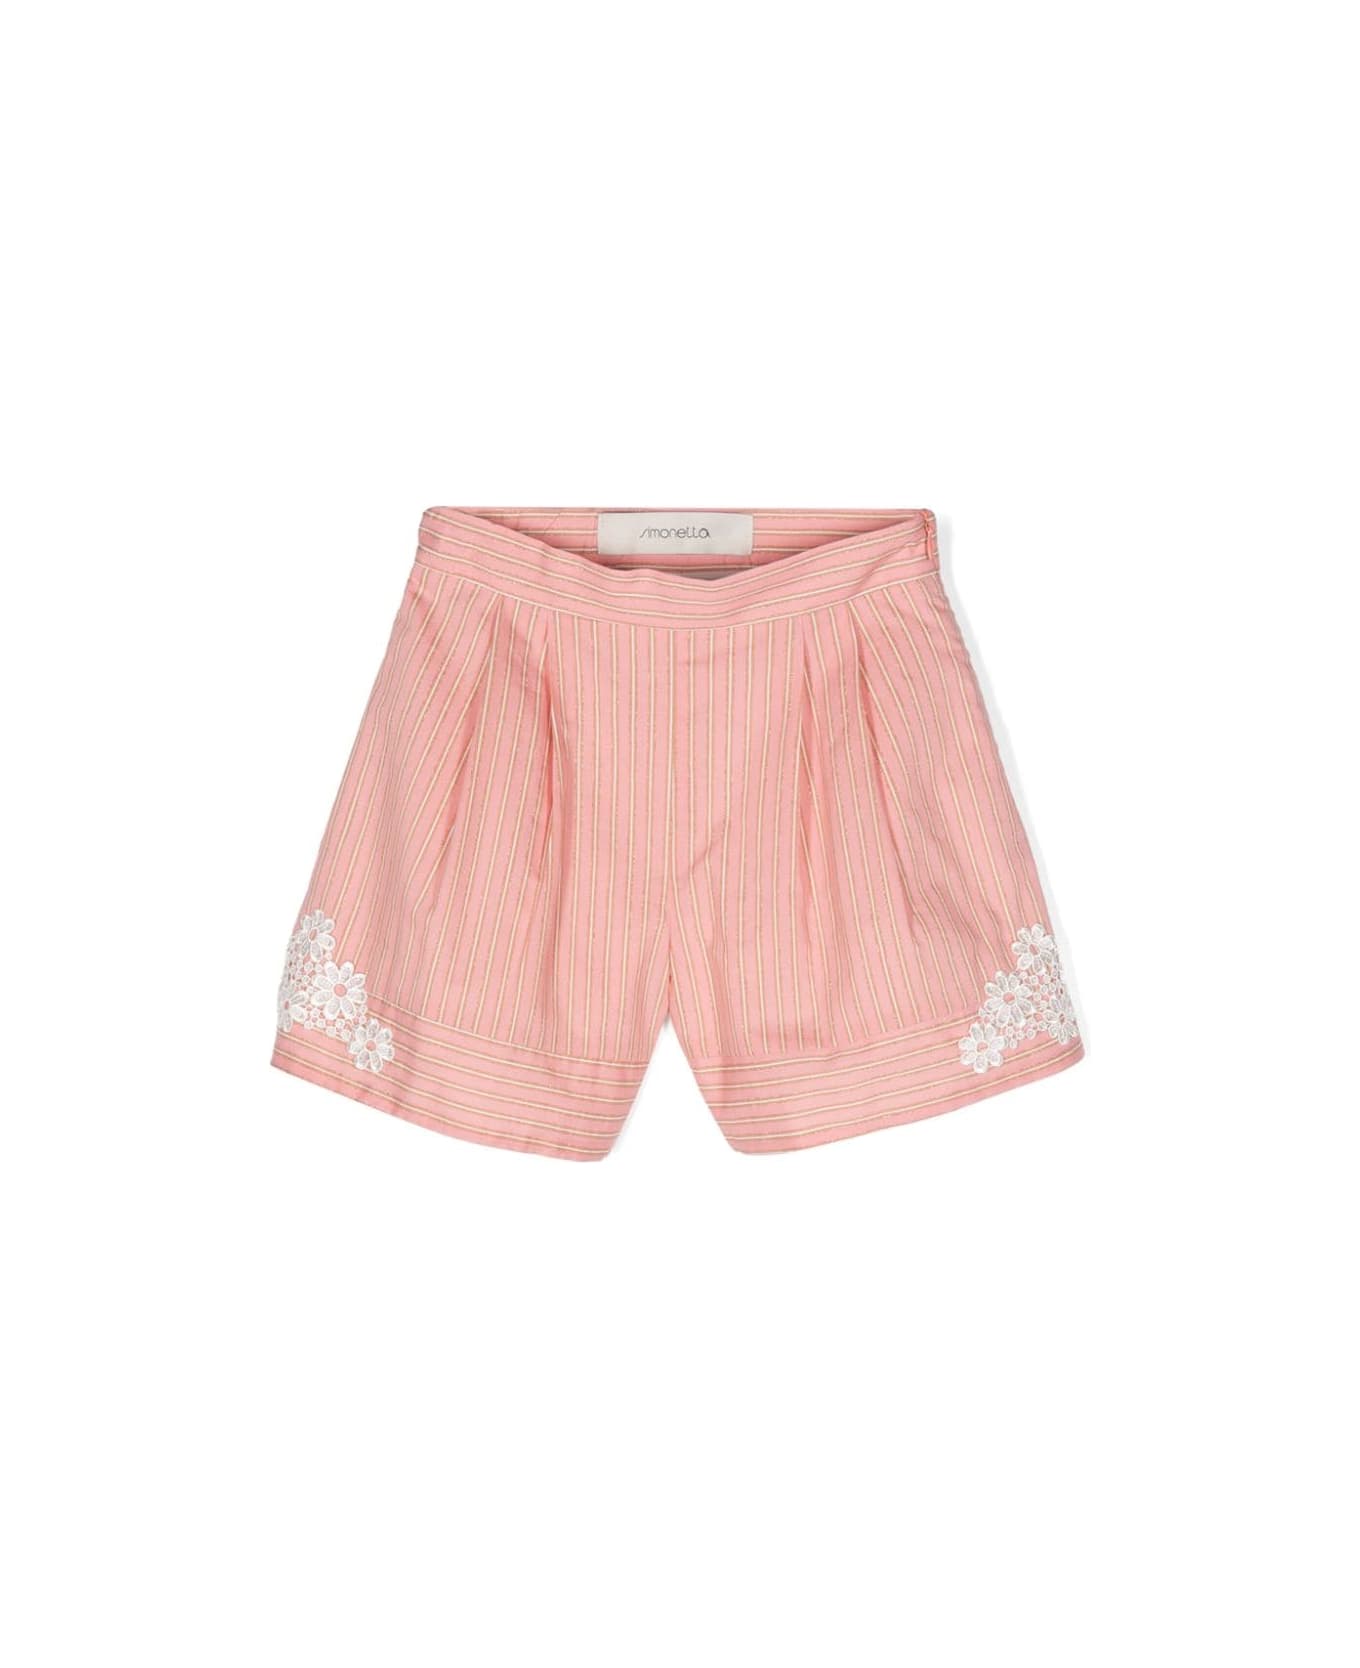 Simonetta Shorts A Righe - Pink ボトムス